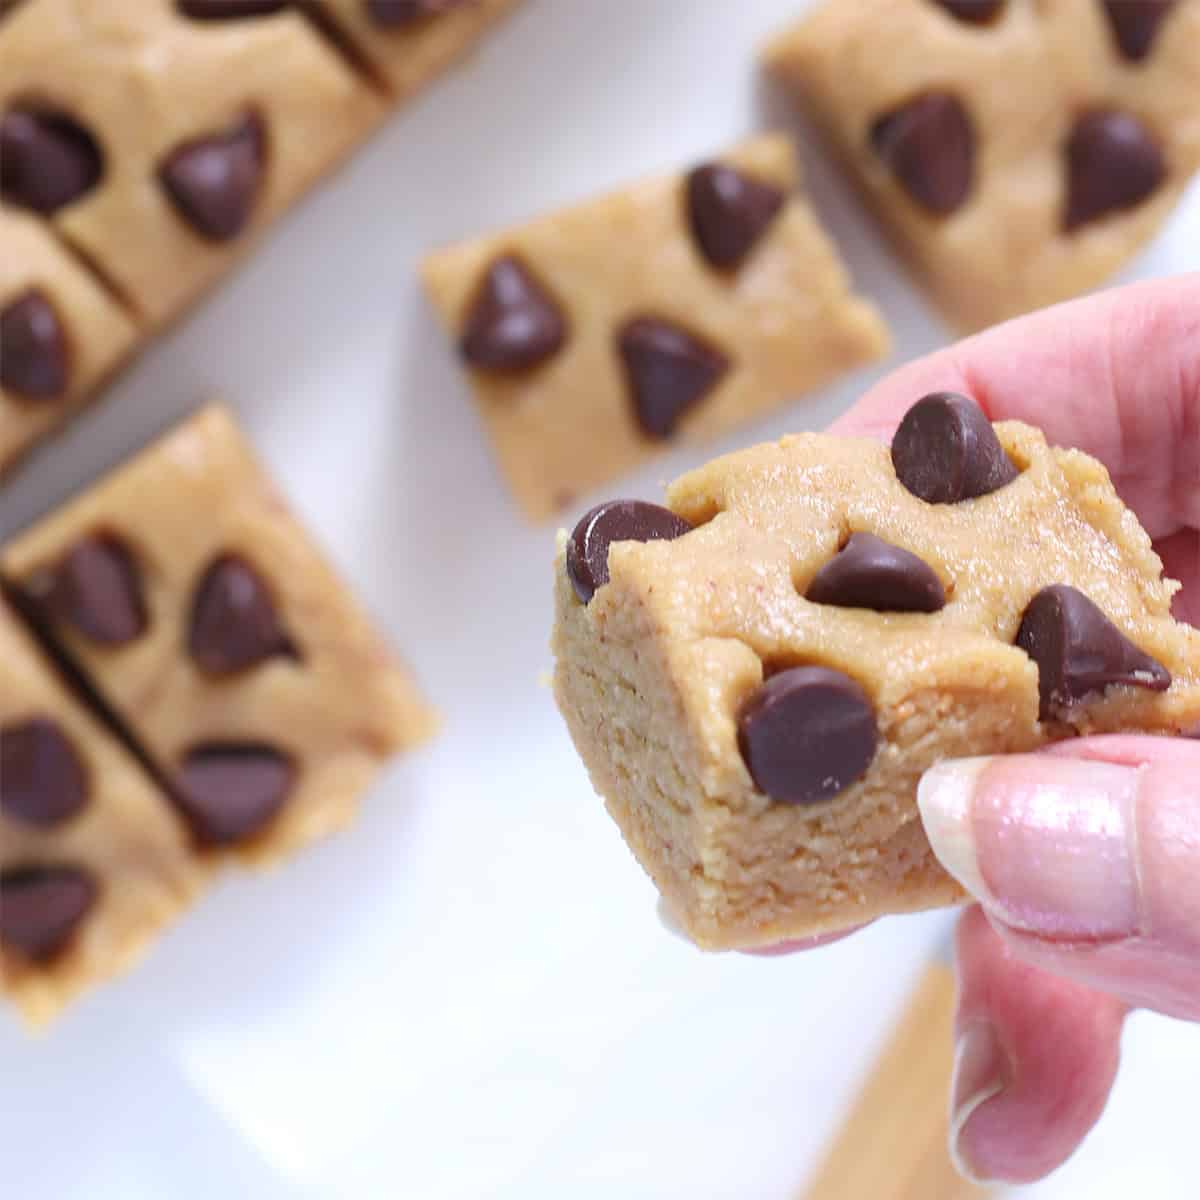 holding a square of peanut butter cookie dough.